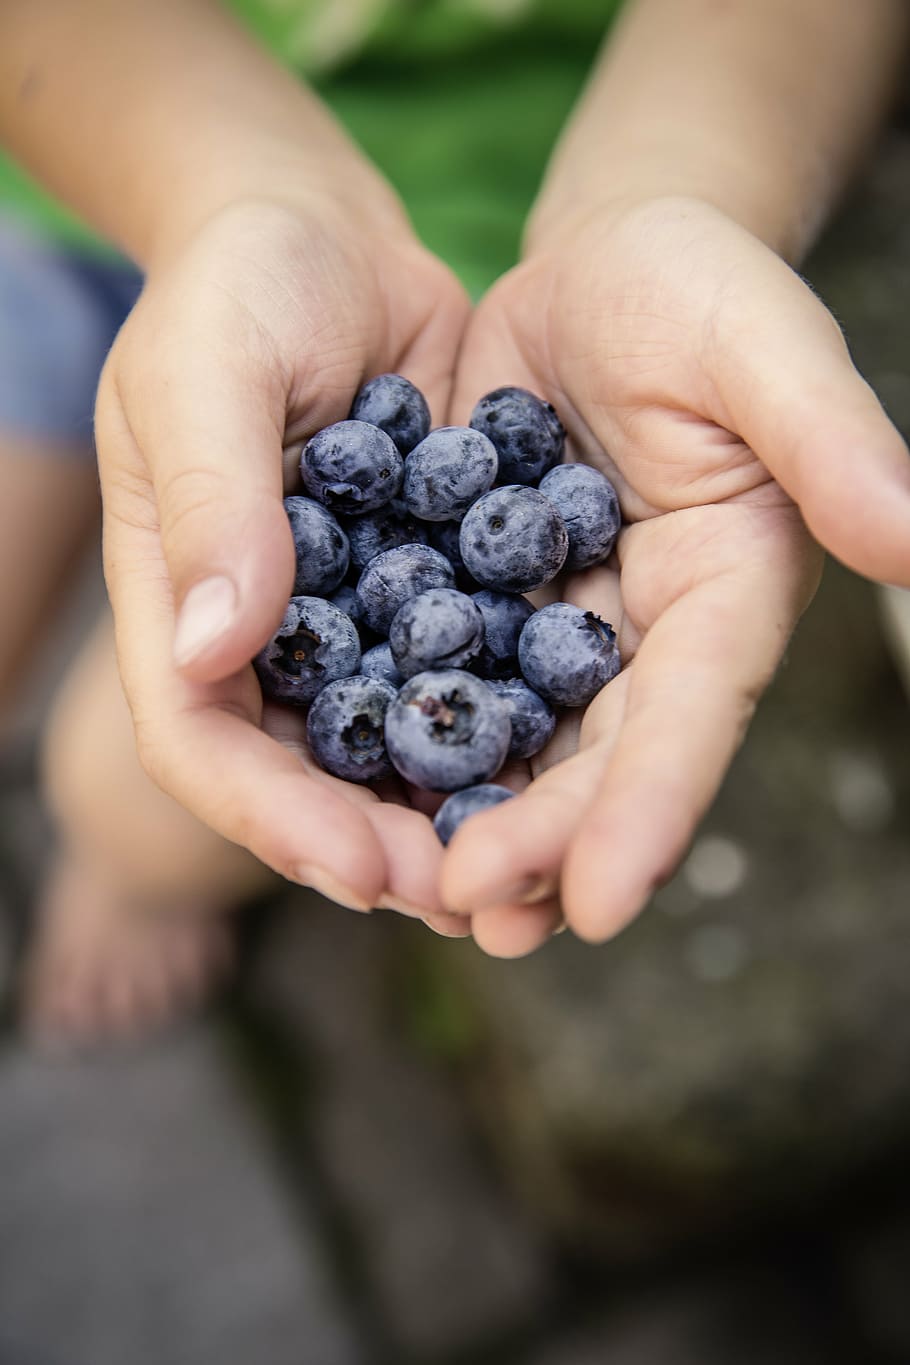 person holding raspberries, berry, blueberry, fruit, food, palm, hand, blur, human hand, human body part